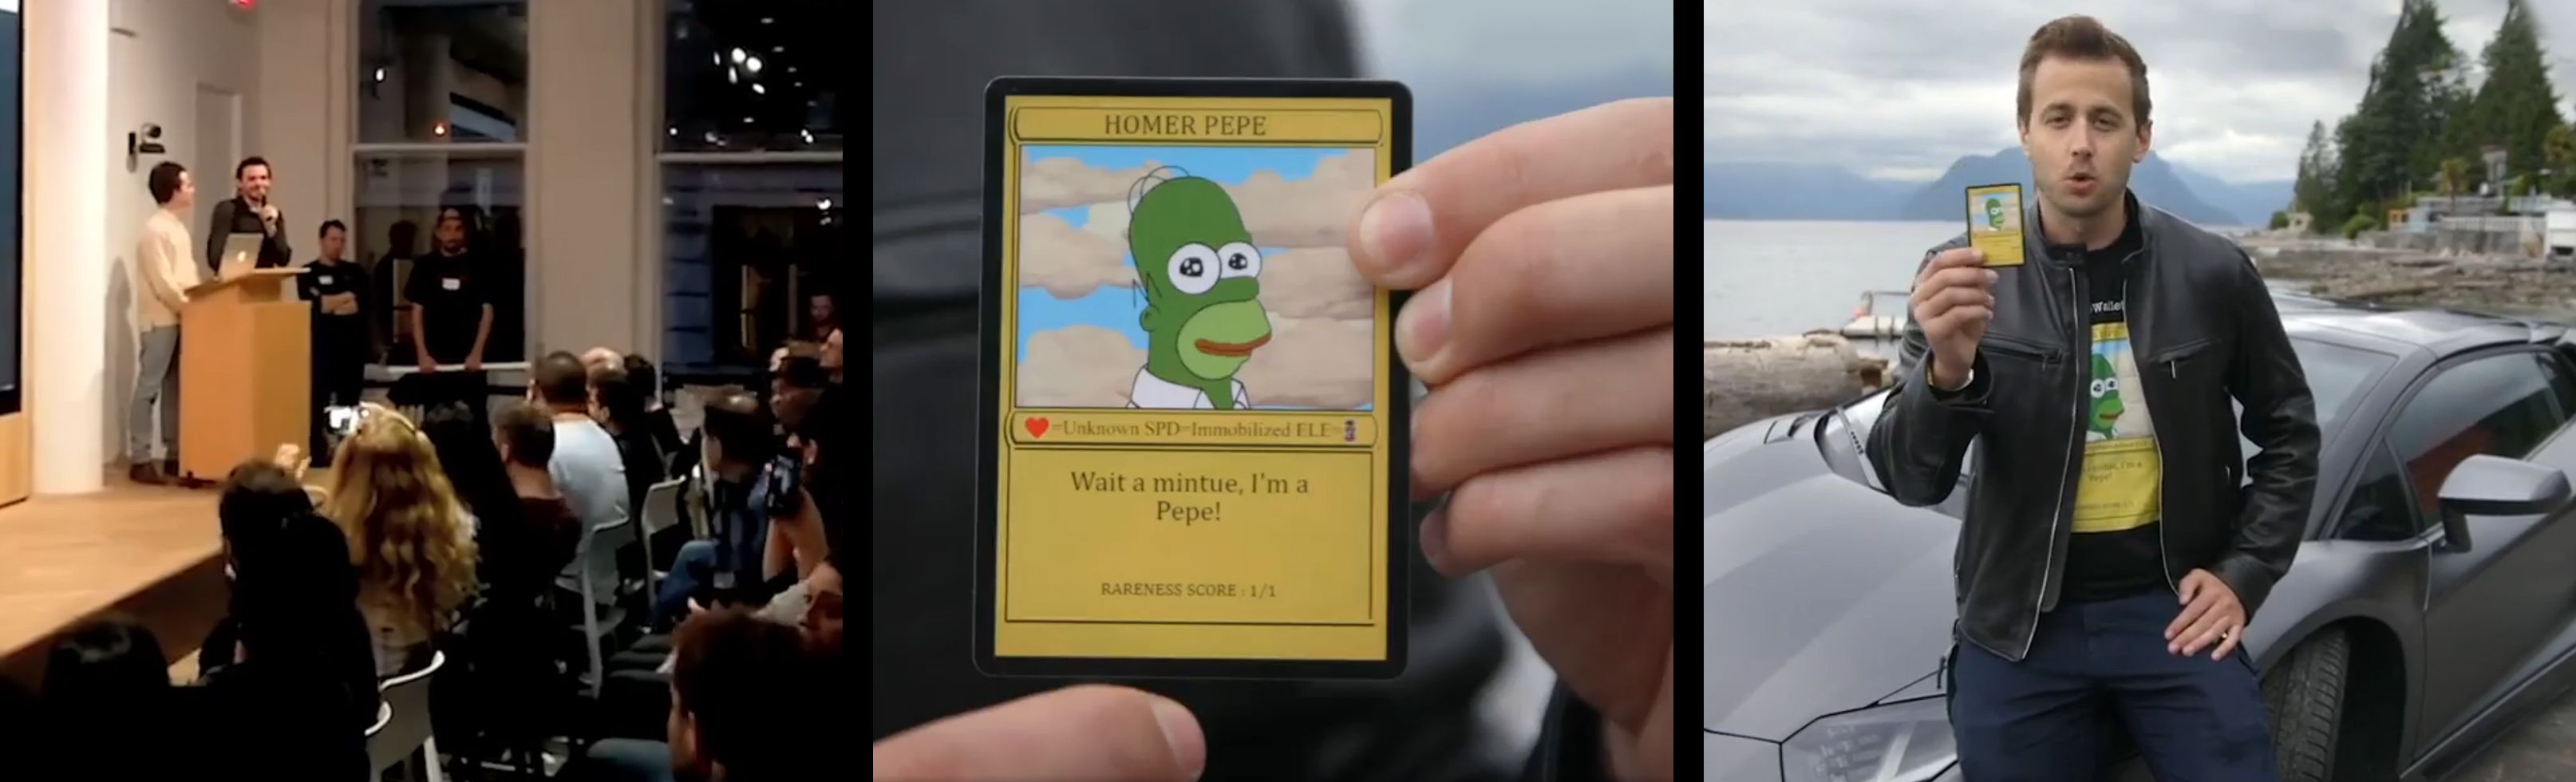 2018 Auction and the collector of the rare “Homer Pepe” NFT trading card from the film “Feels Good Man” by Author Jones, 2020